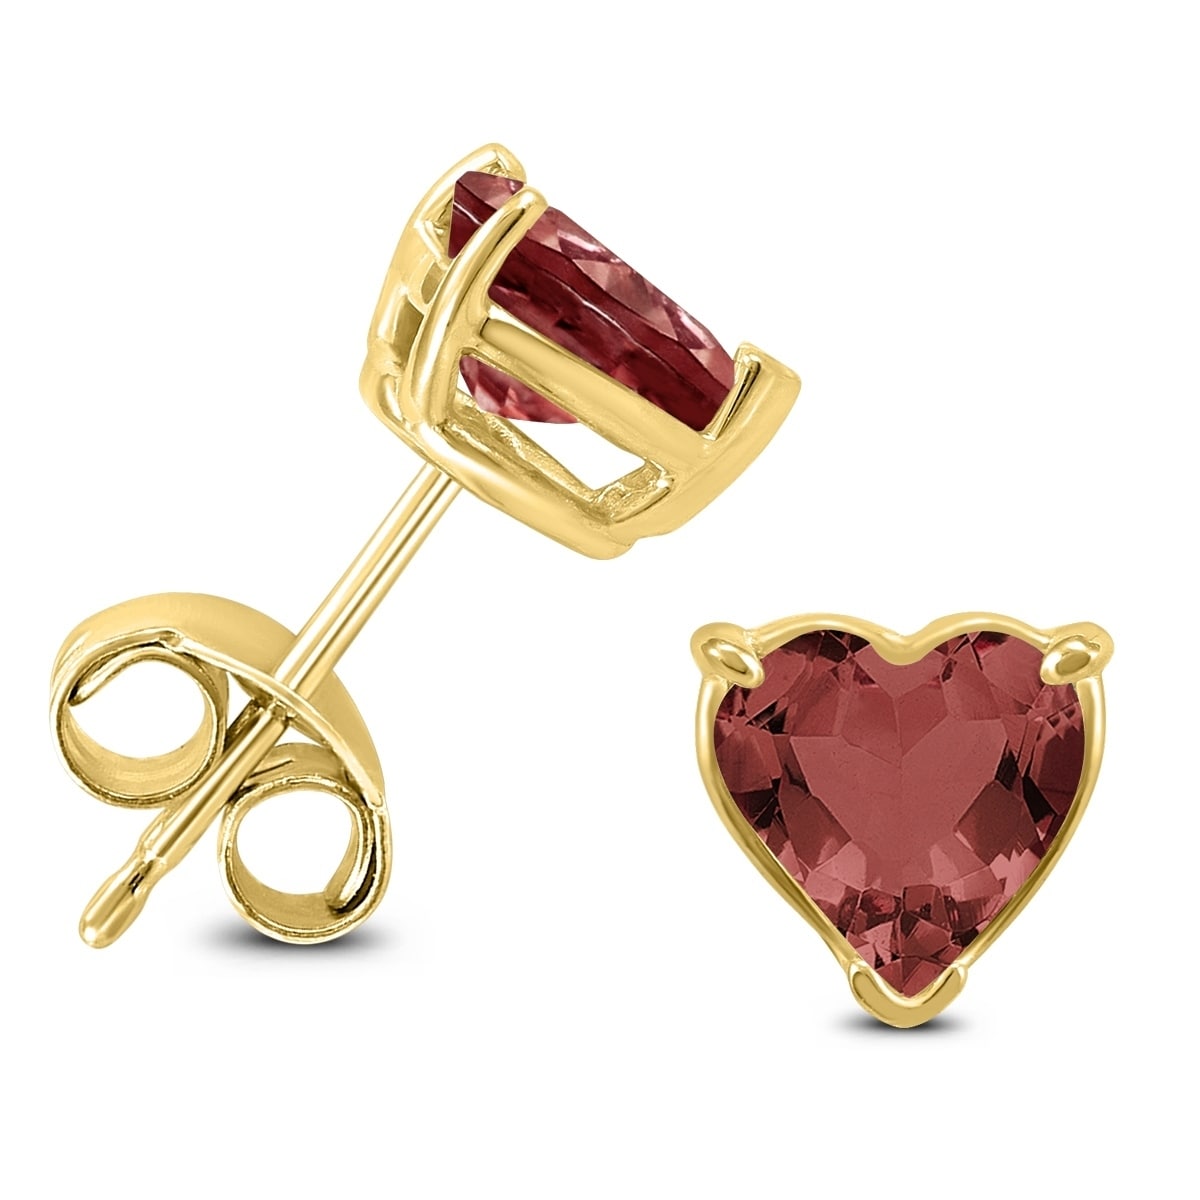 Approximate Measurements 6mm x 6mm 14K Yellow Gold 6mm Heart Simulated Garnet Earrings 